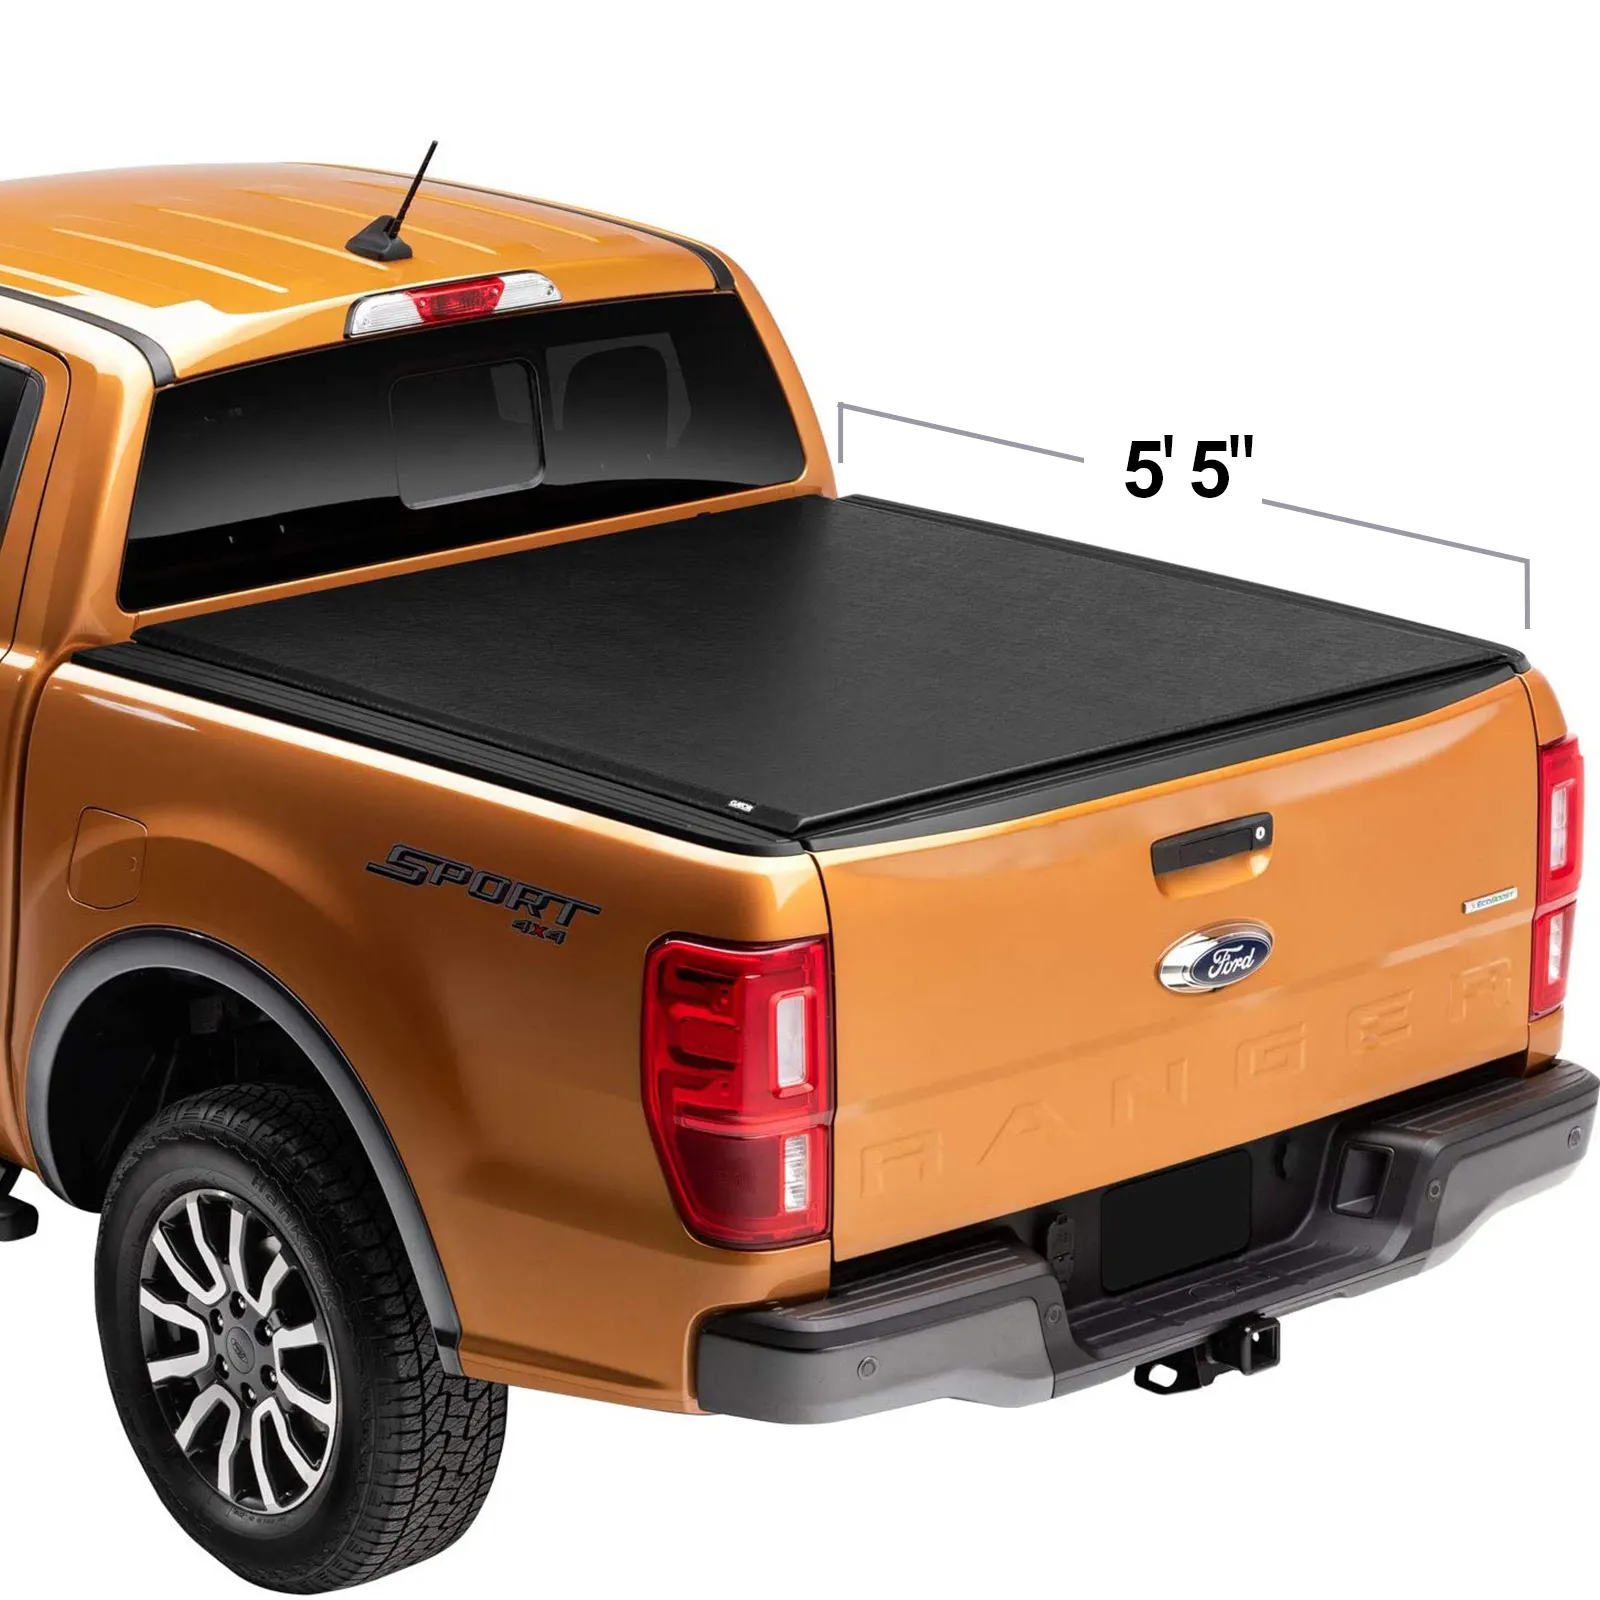 2021 Made in China Soft Roll Pickup bed tonneau cover 5.5 inch  xlt truck bed cover for ford ranger